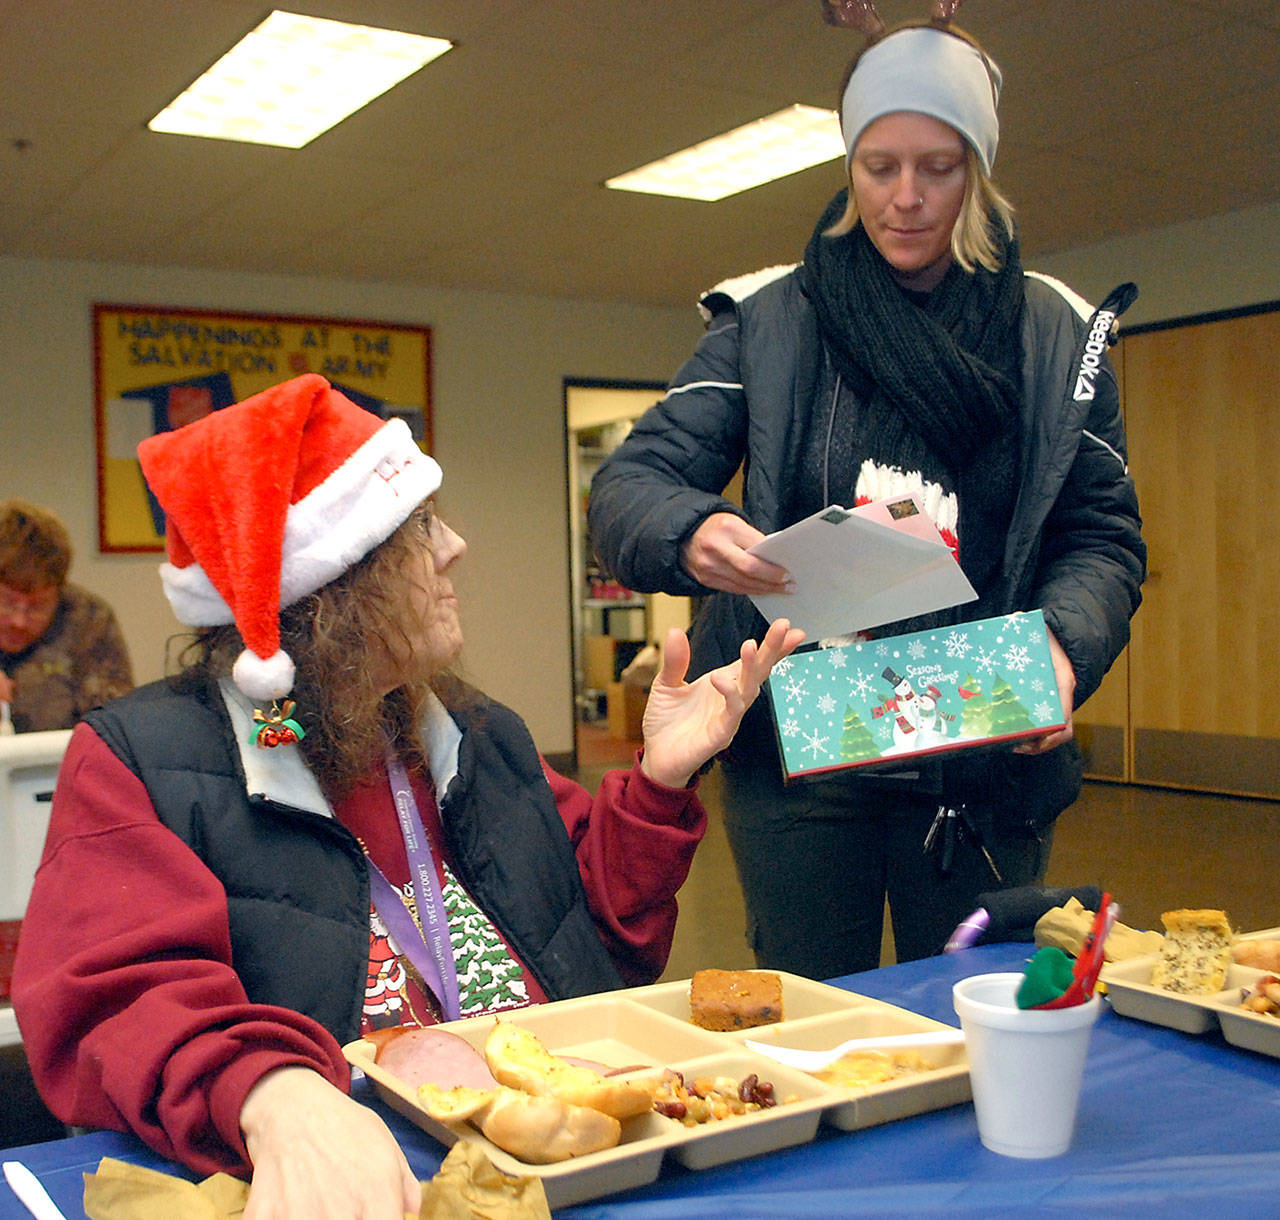 Amy Miller of the Rediscovery program, standing, passes out pre-stamped Christmas cards to Kathryn Brown of Port Angeles during Tuesday’s Christmas Eve lunch at the Salvation Army kitchen in Port Angeles. (Keith Thorpe/Peninsula Daily News)